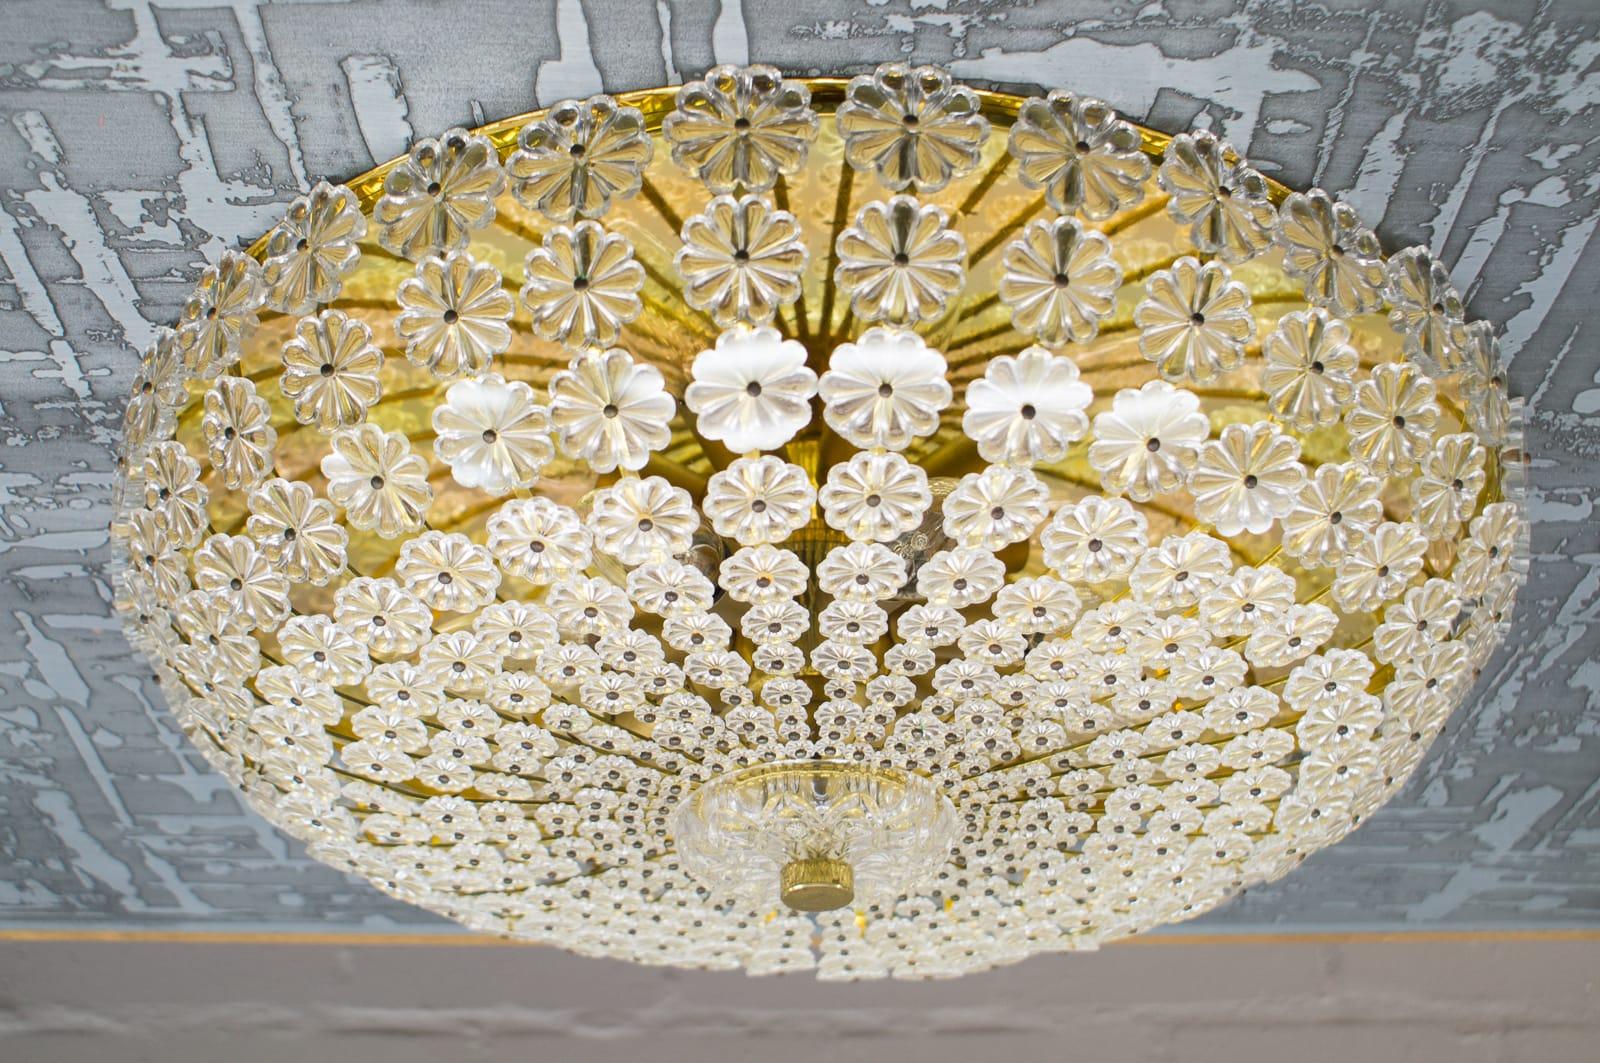 Stylish original midcentury floral glass wall and ceiling lamp.
Eight E14 bulbs on a brass plate.
Very good vintage condition with normal signs of use and great patina.
100% original condition and fully functional.
All parts complete. All